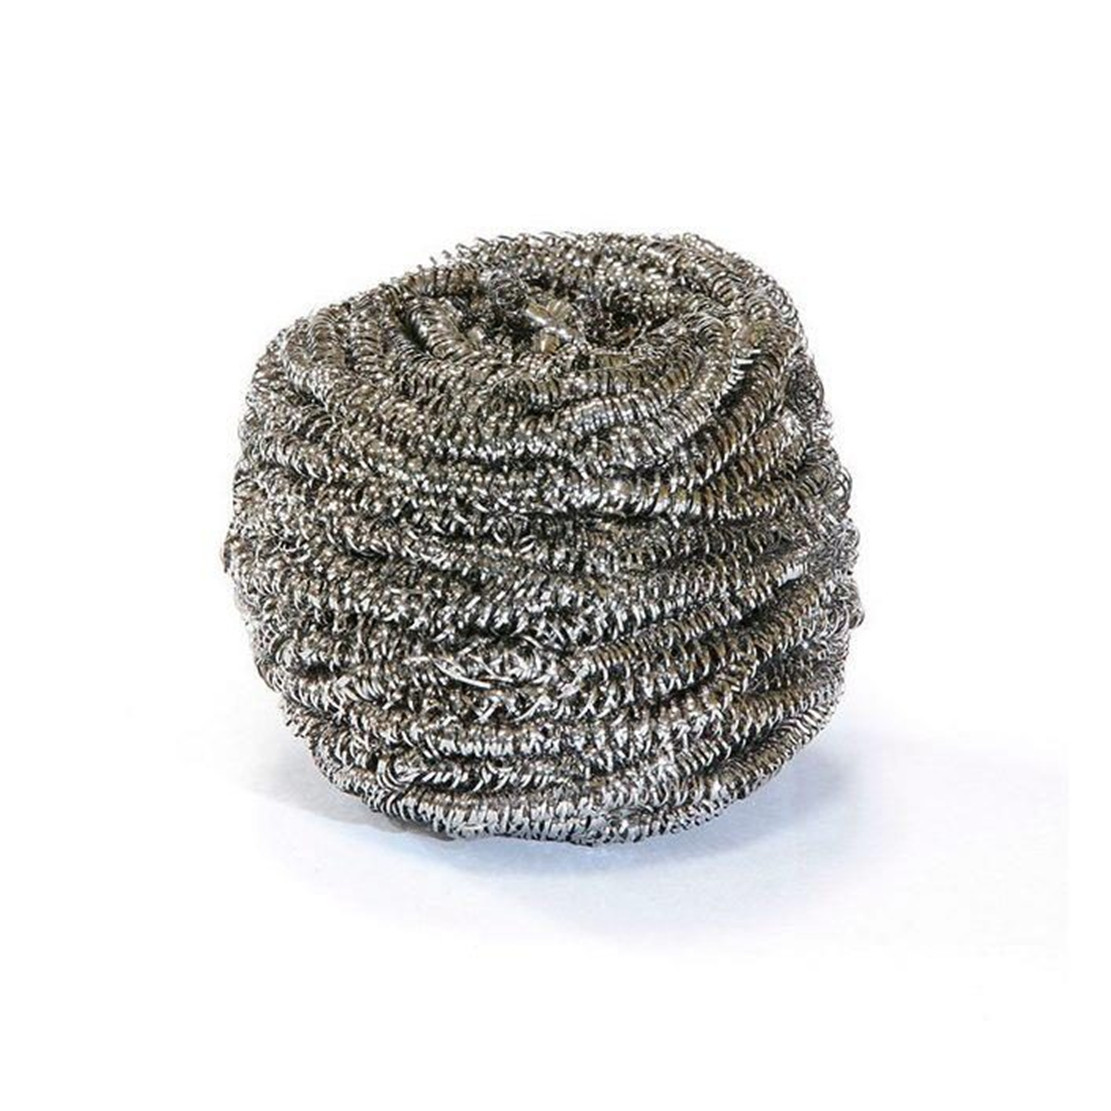  14G 17g 20g Kitchen Cleaning Stainless Steel 410 Pot Scourer / Stainless Steel Pot Scrubber Manufactures